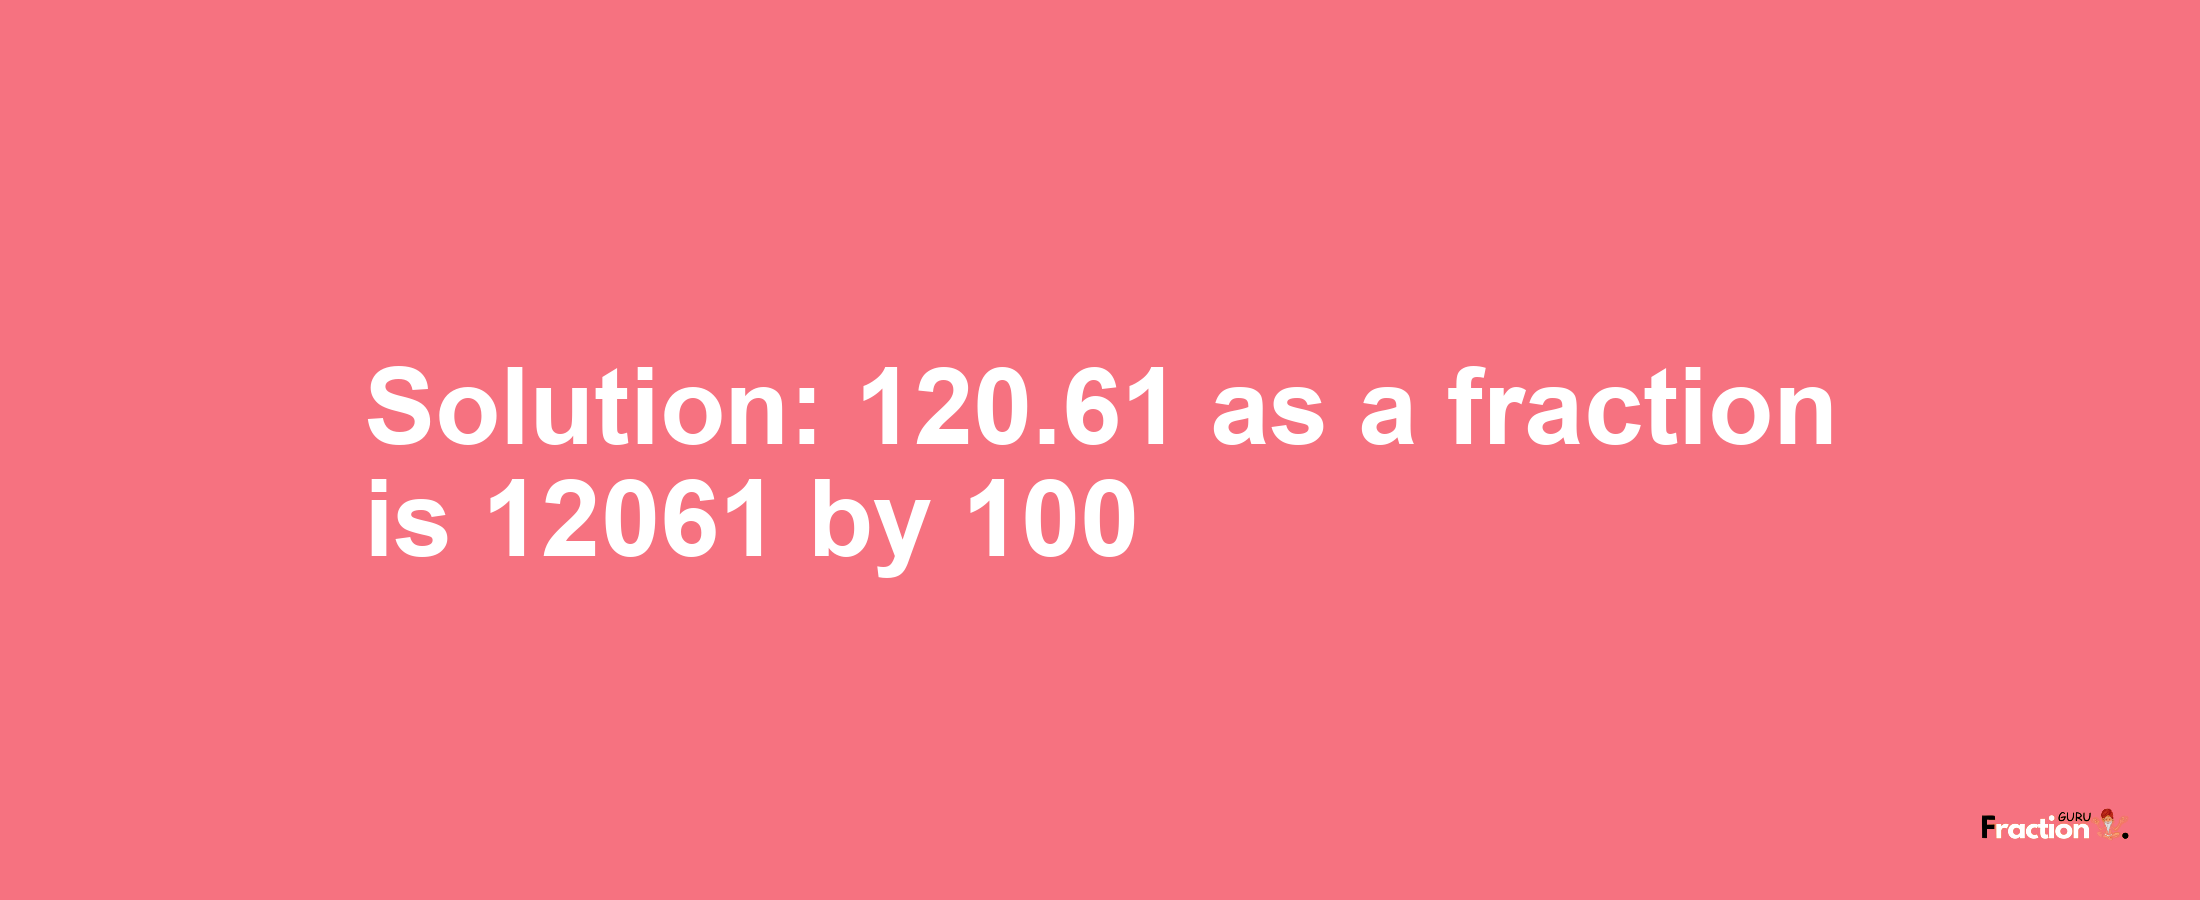 Solution:120.61 as a fraction is 12061/100